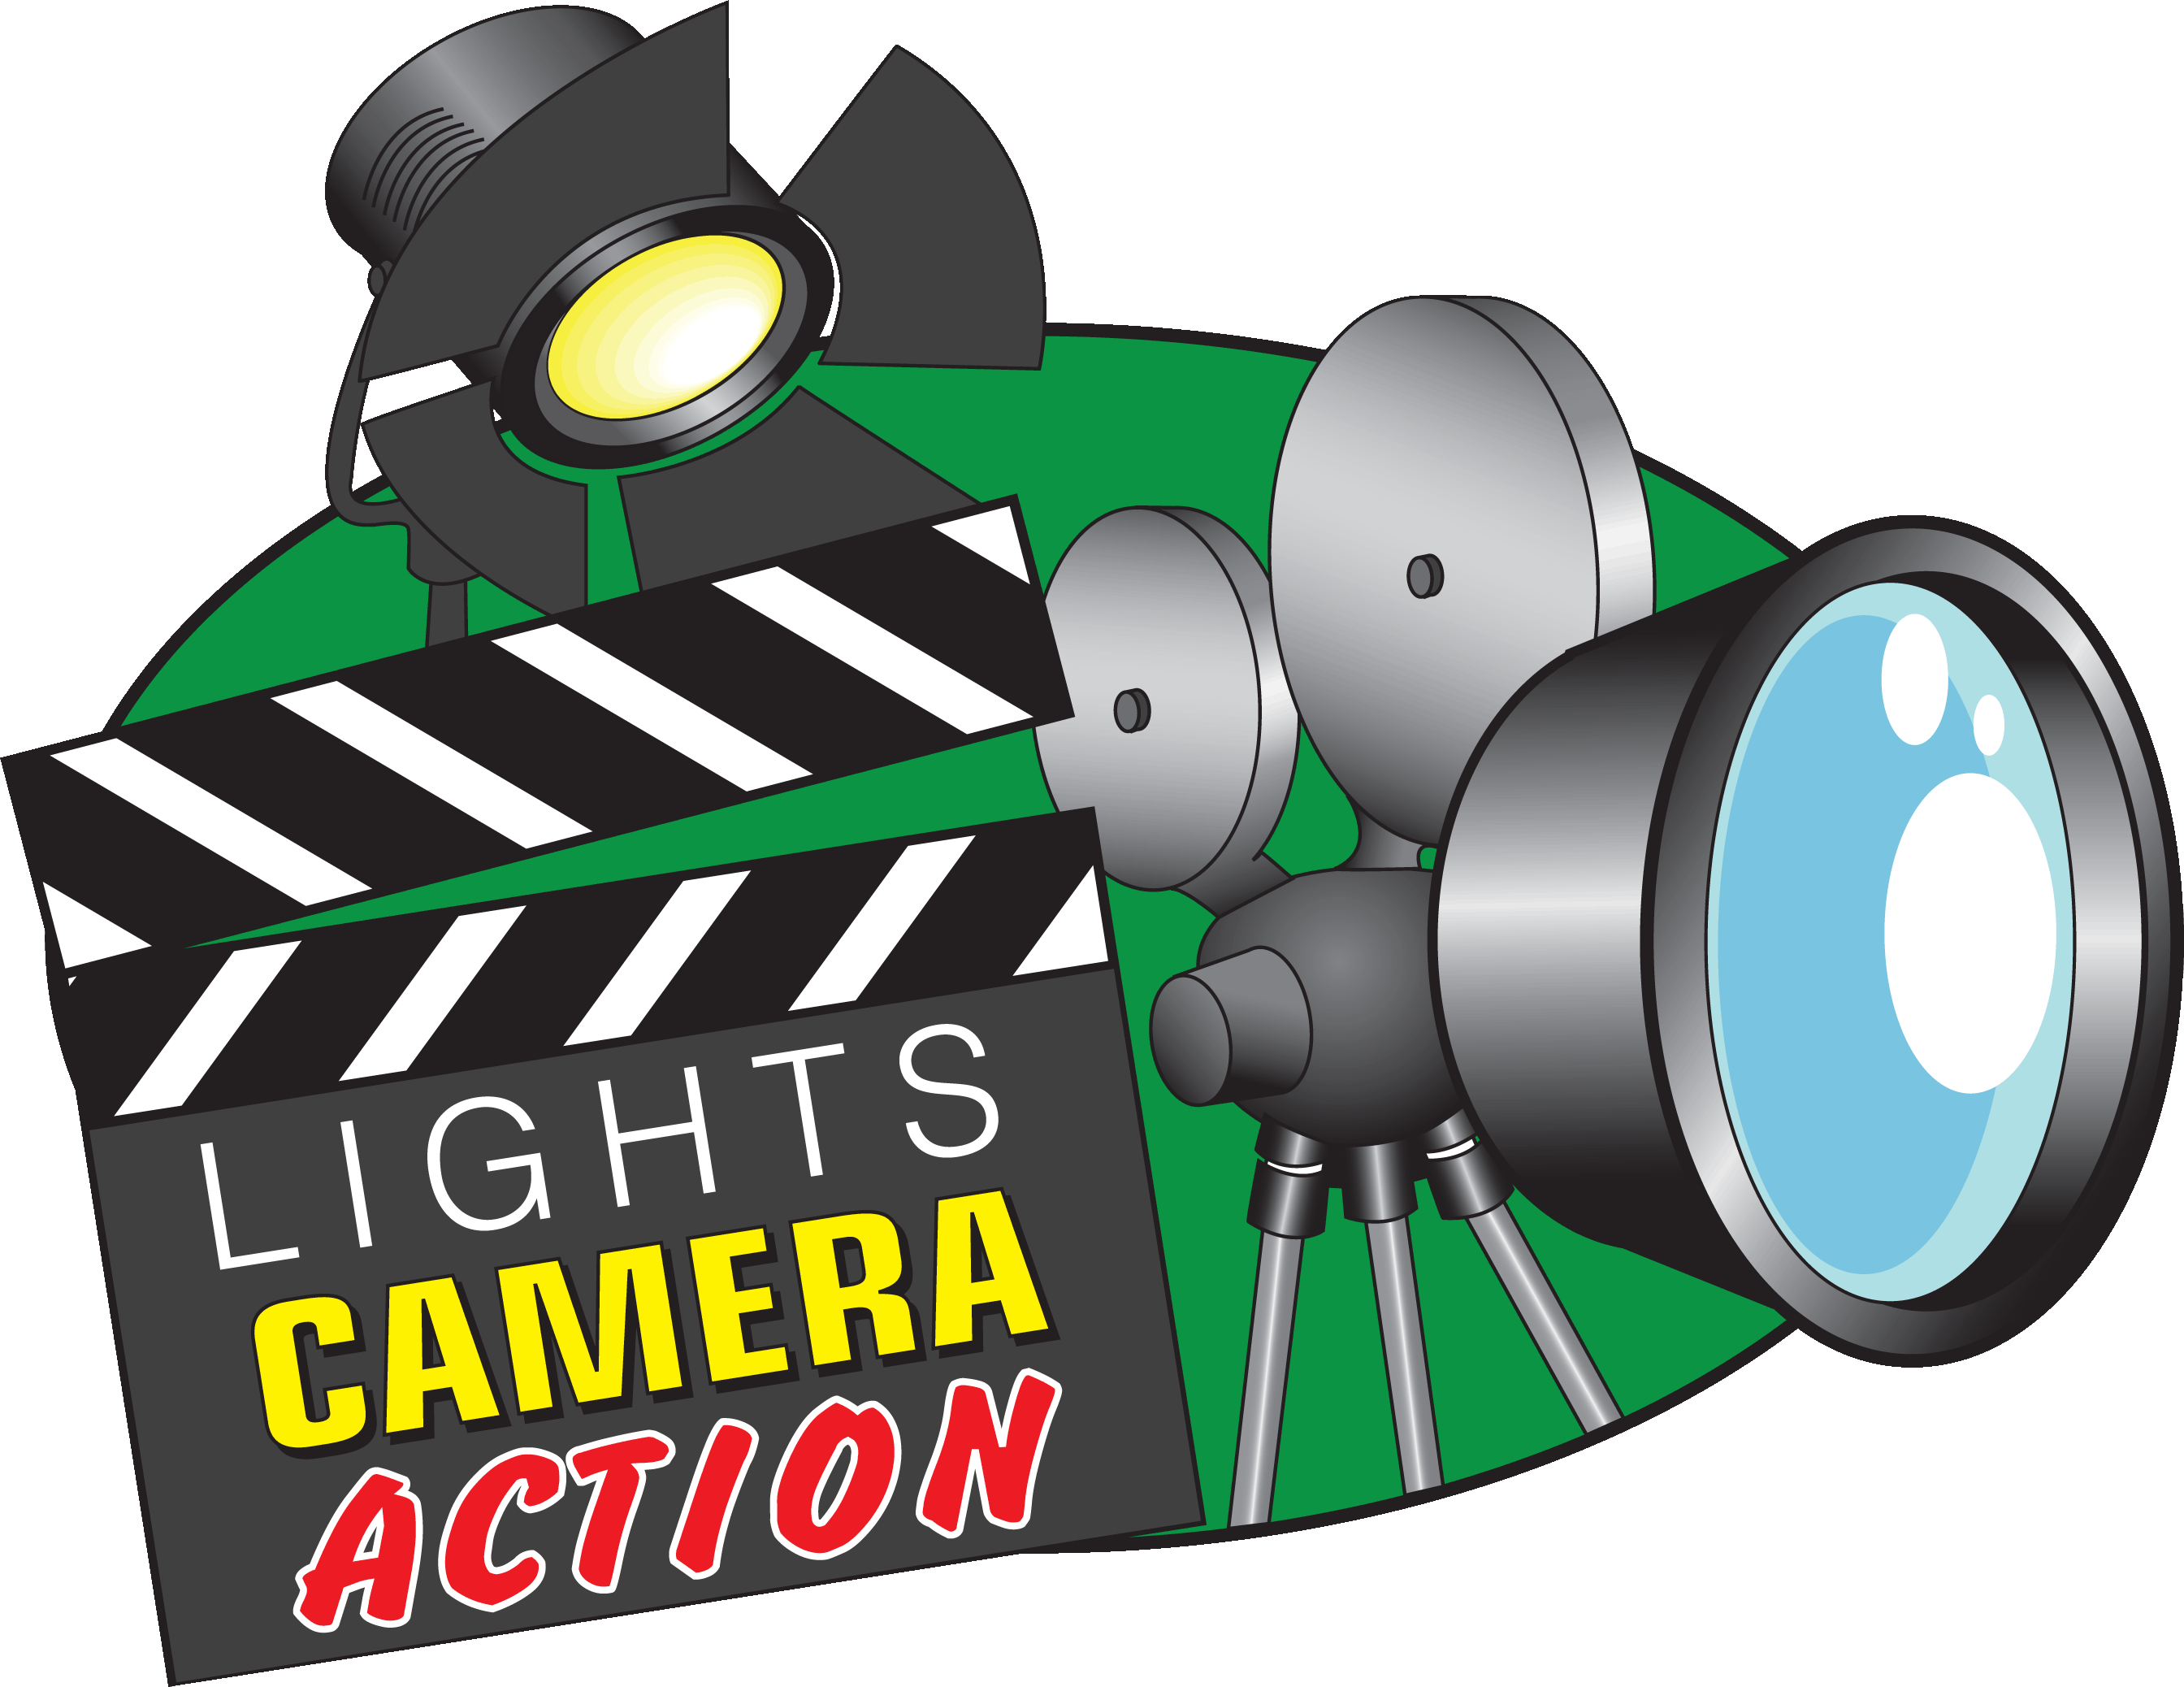 14 Lights Camera Action Clip Art   Free Cliparts That You Can Download